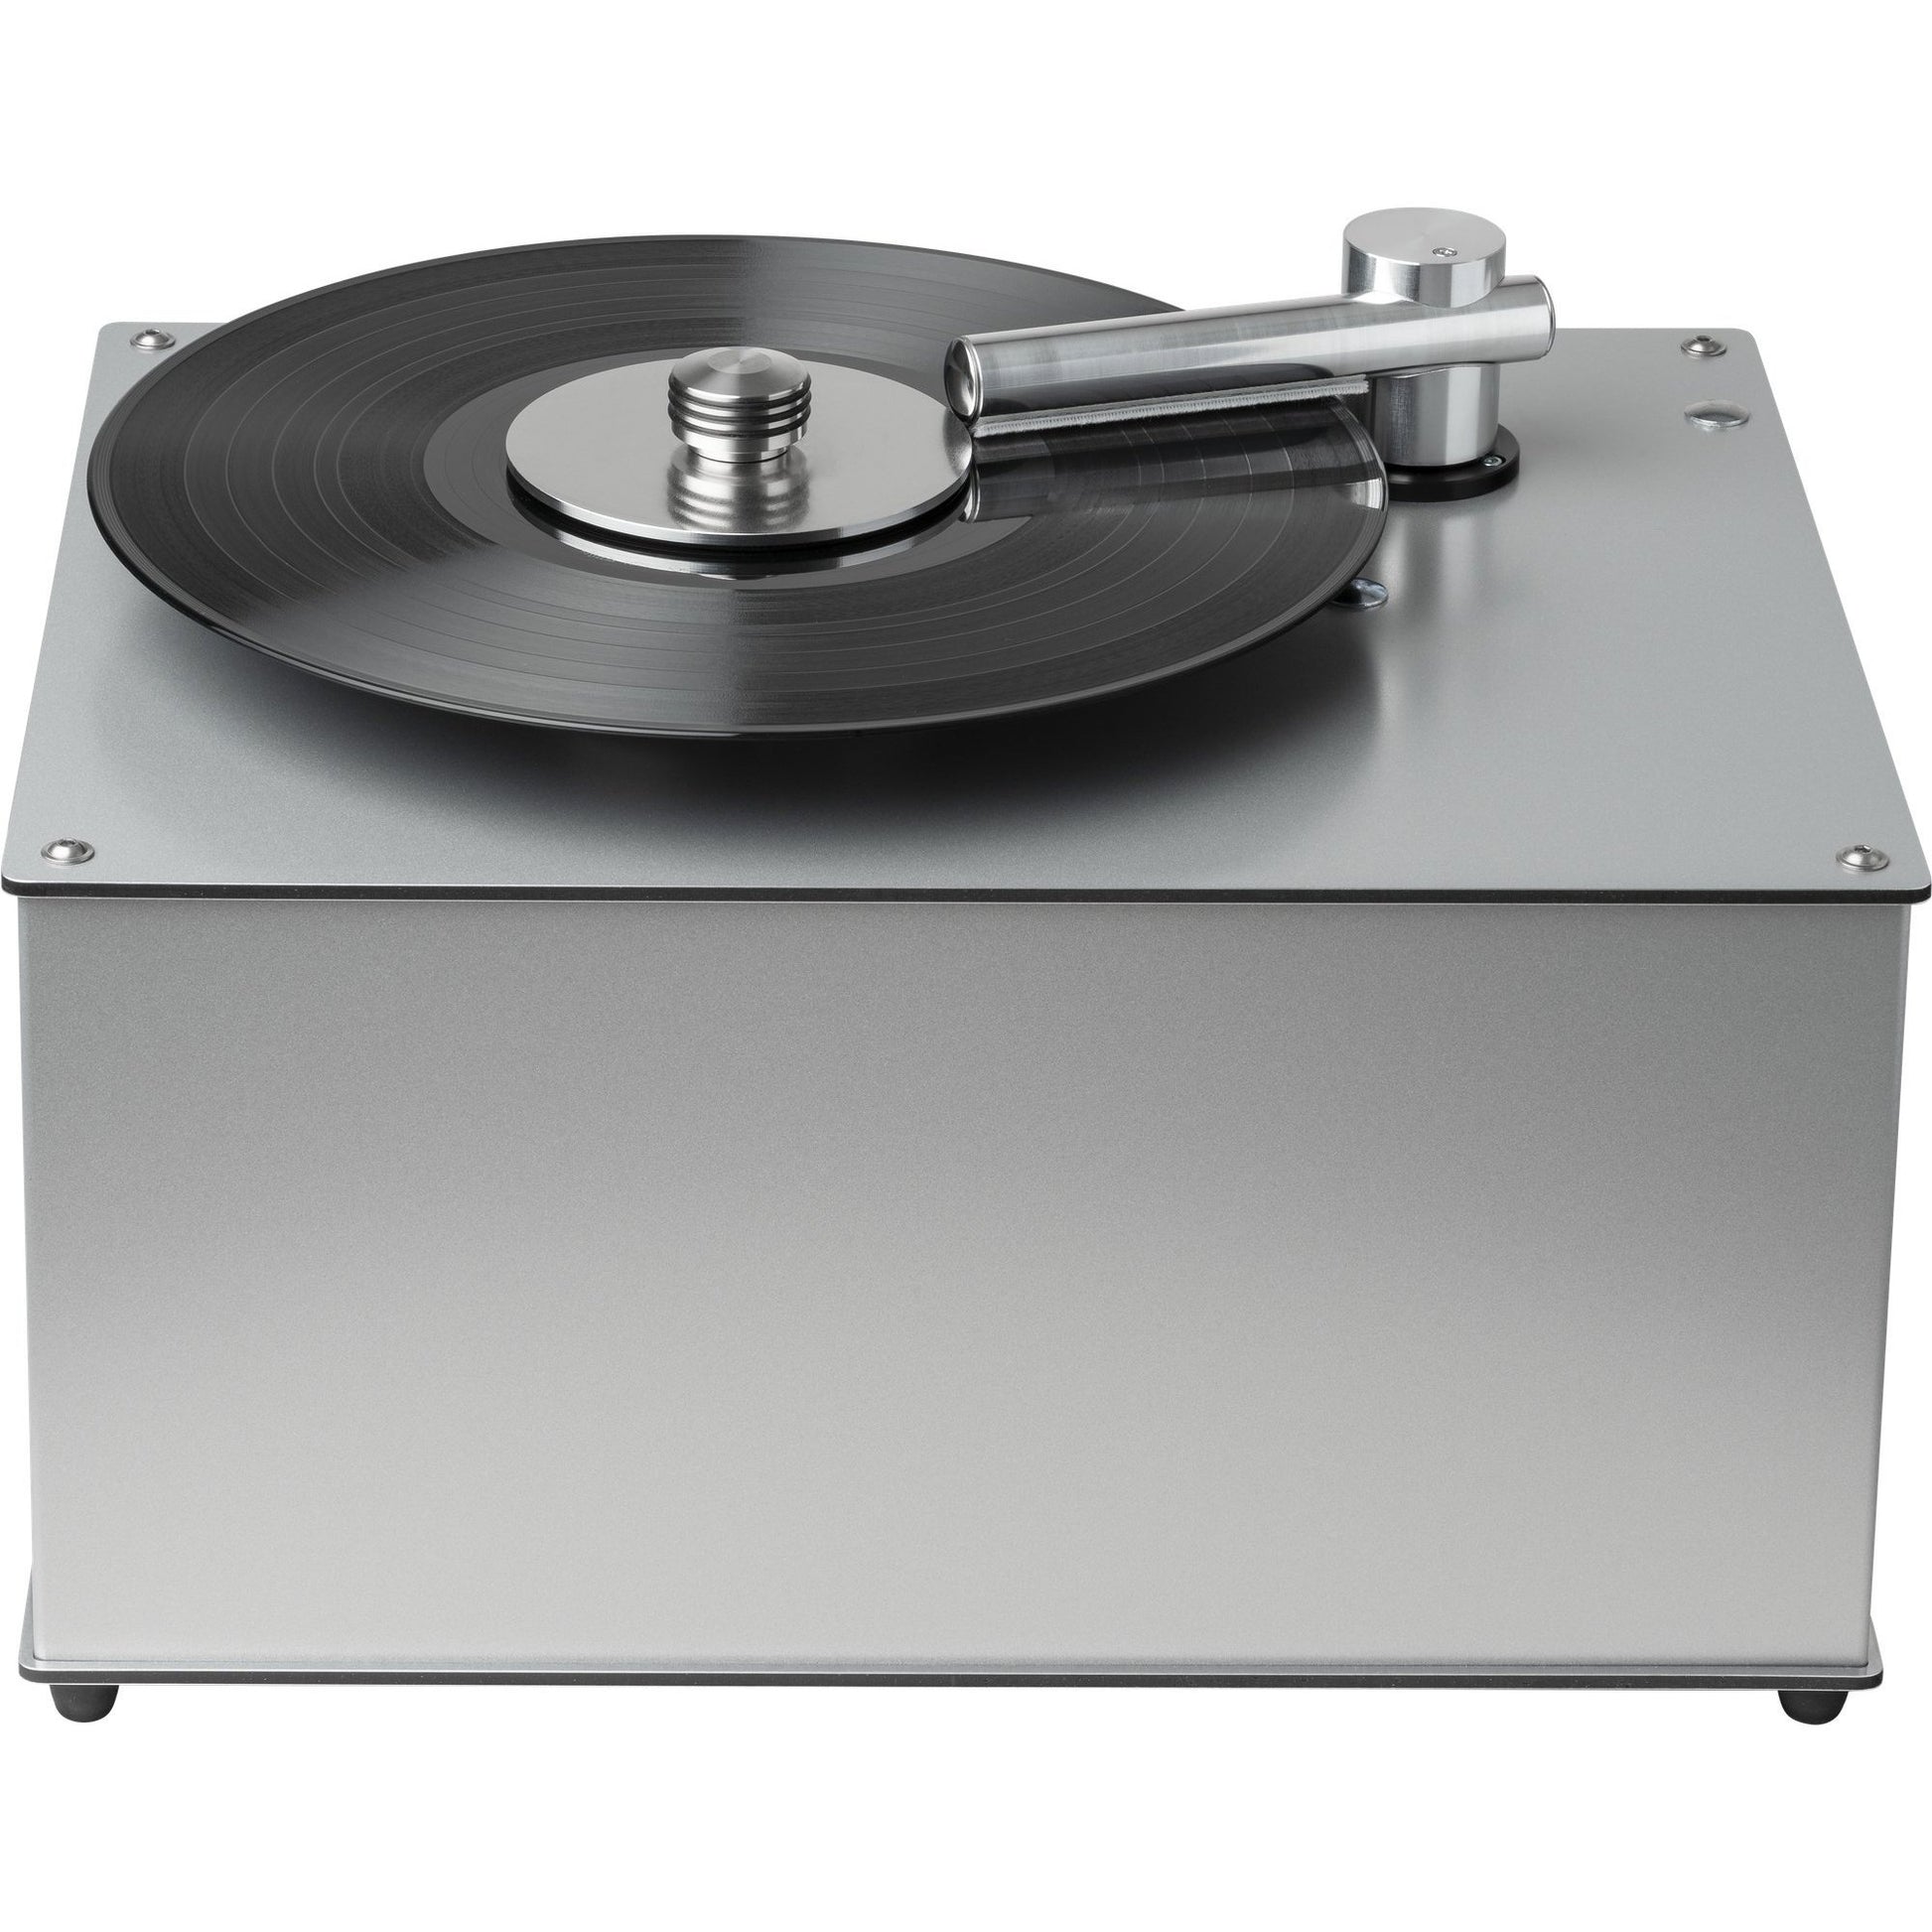 VC-S2 Premium Record Cleaning Machine-Pro-Ject-Mood